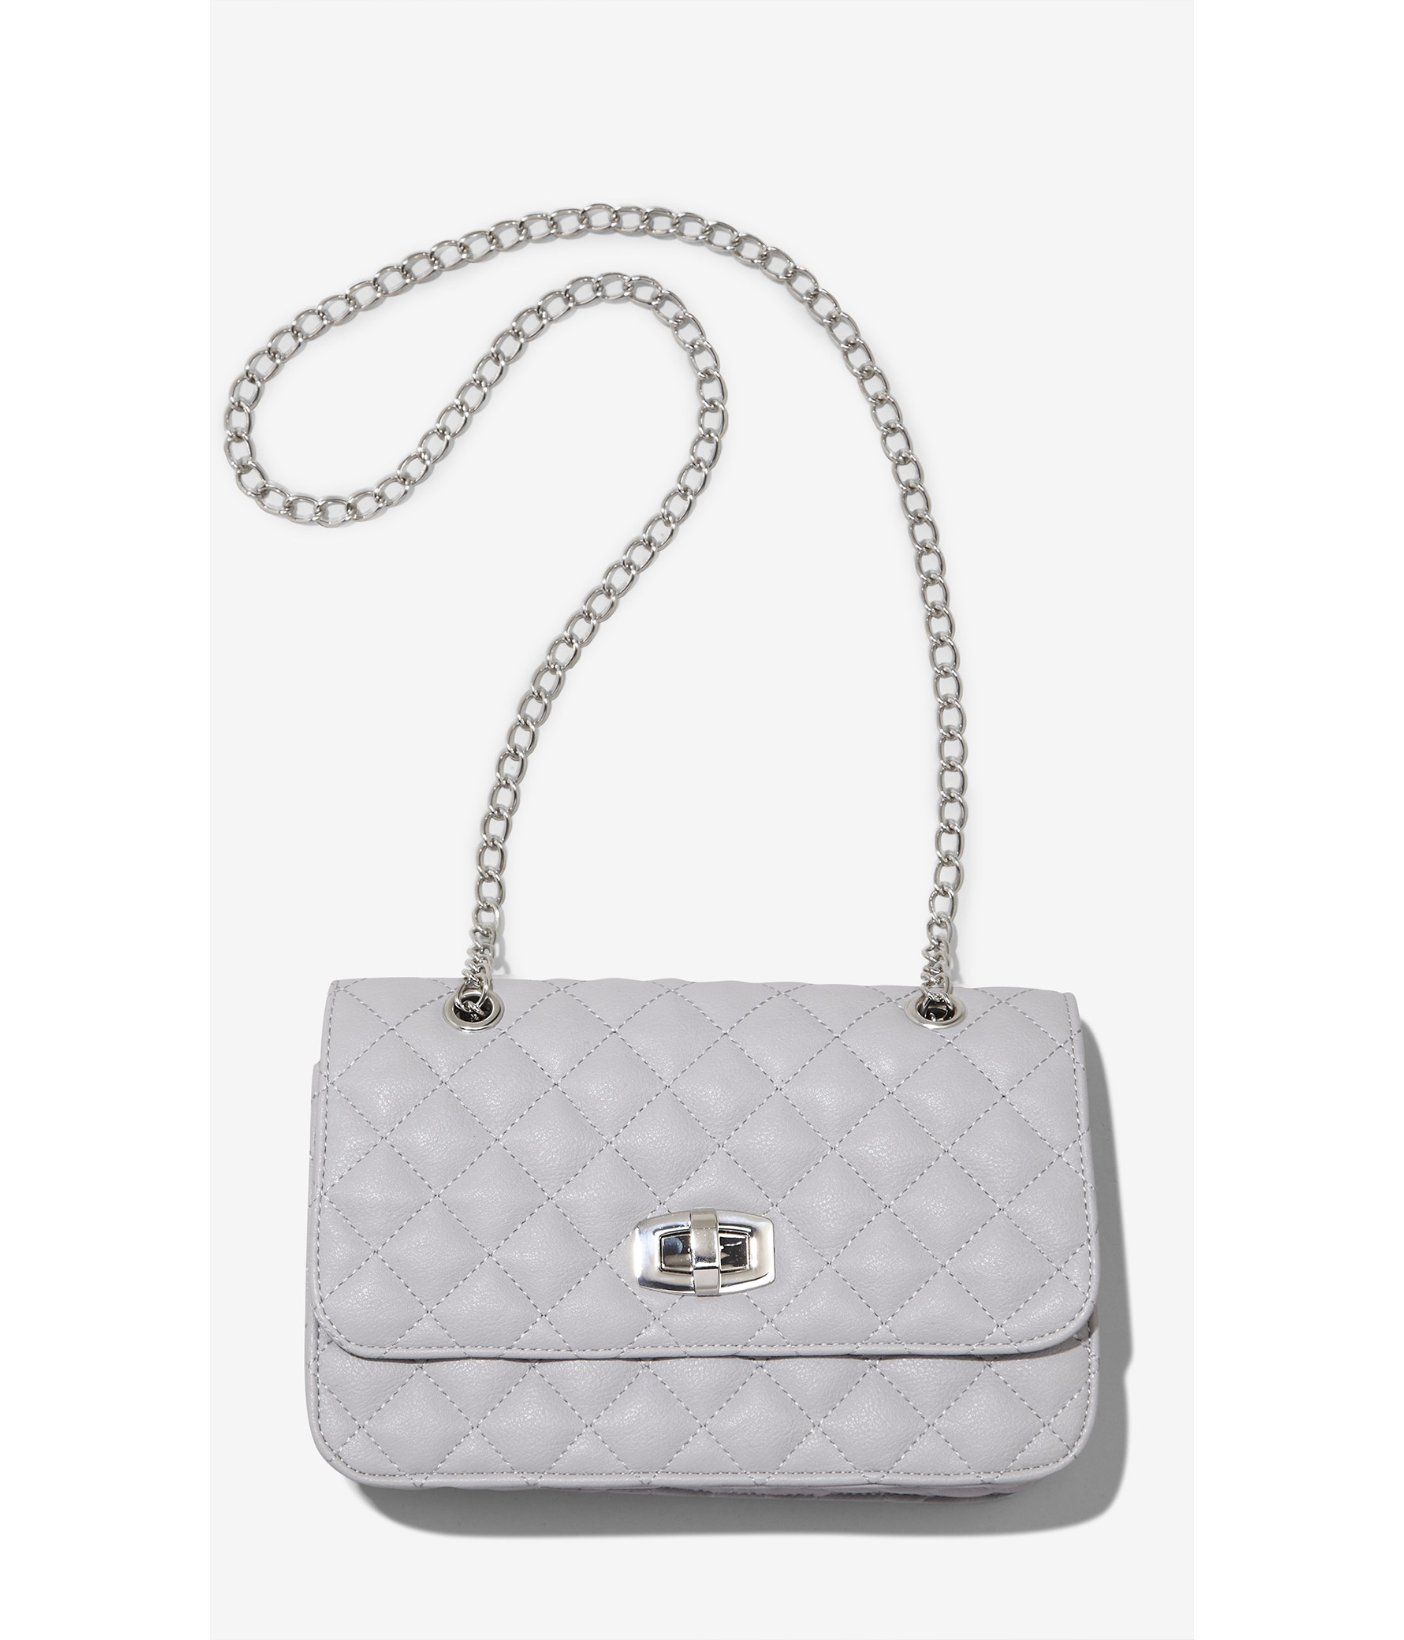 Lyst - Express Quilted Chain Strap Shoulder Bag in Gray